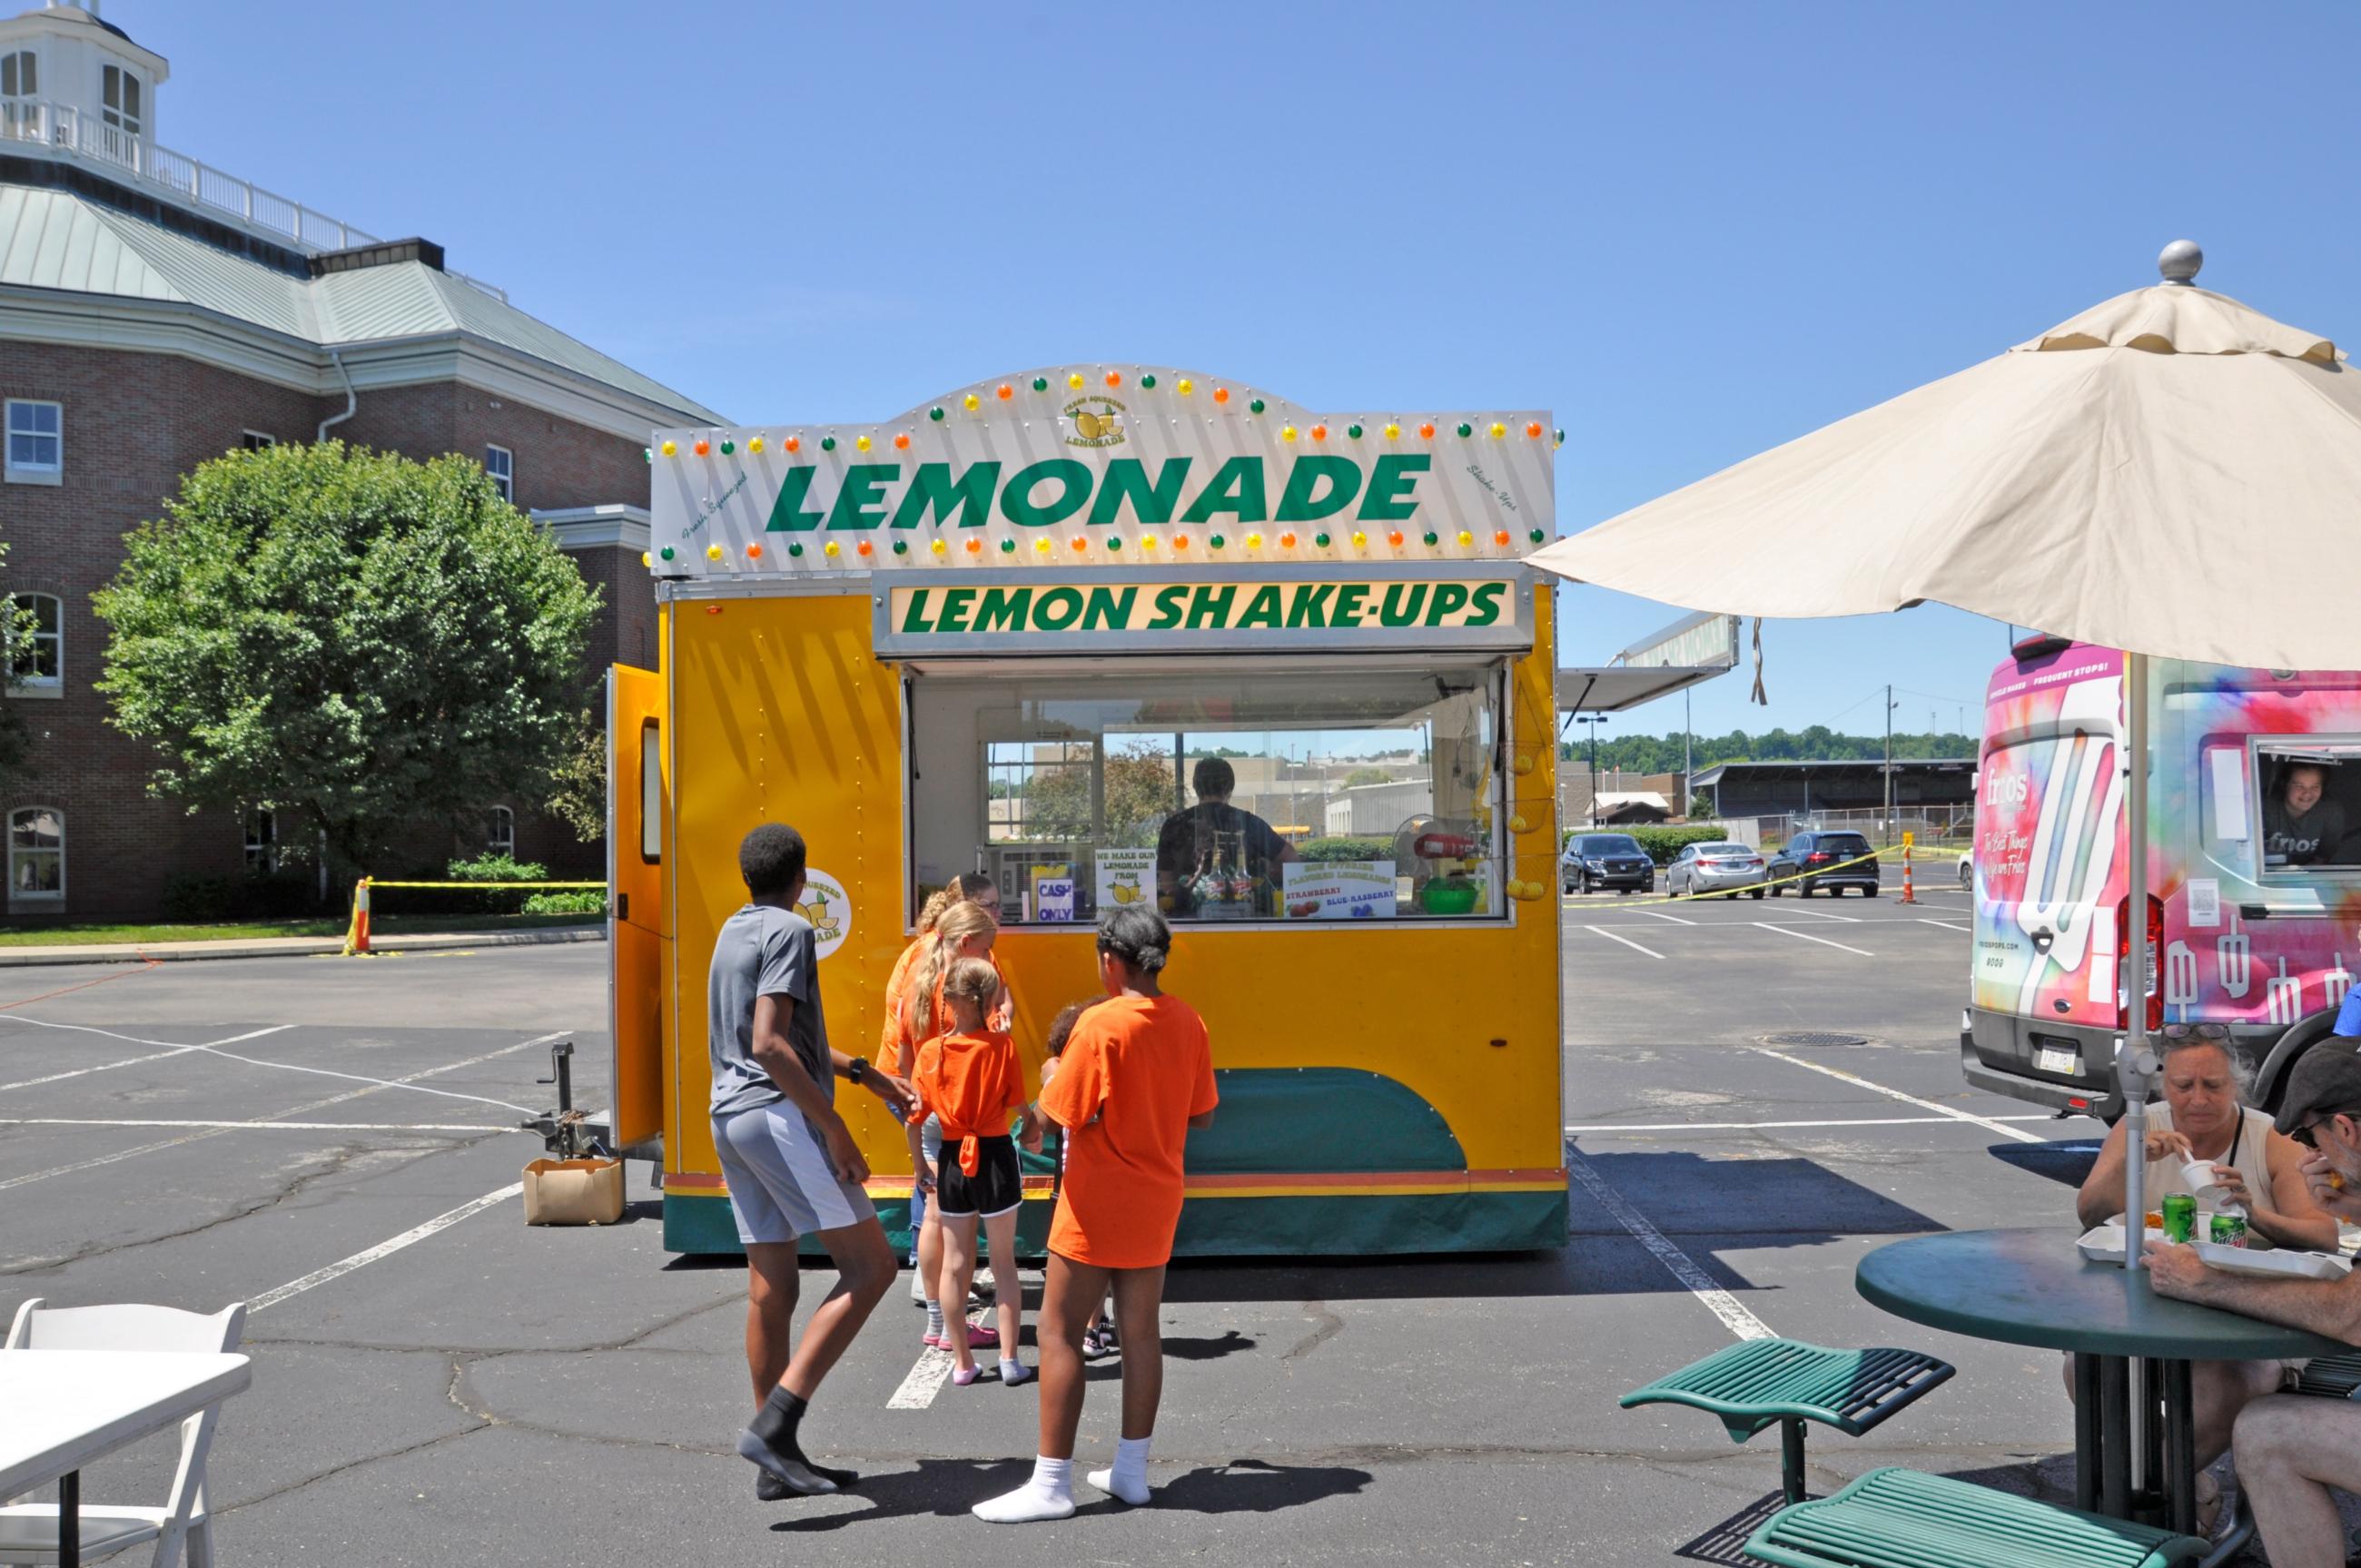 Youth stand in line for lemonade